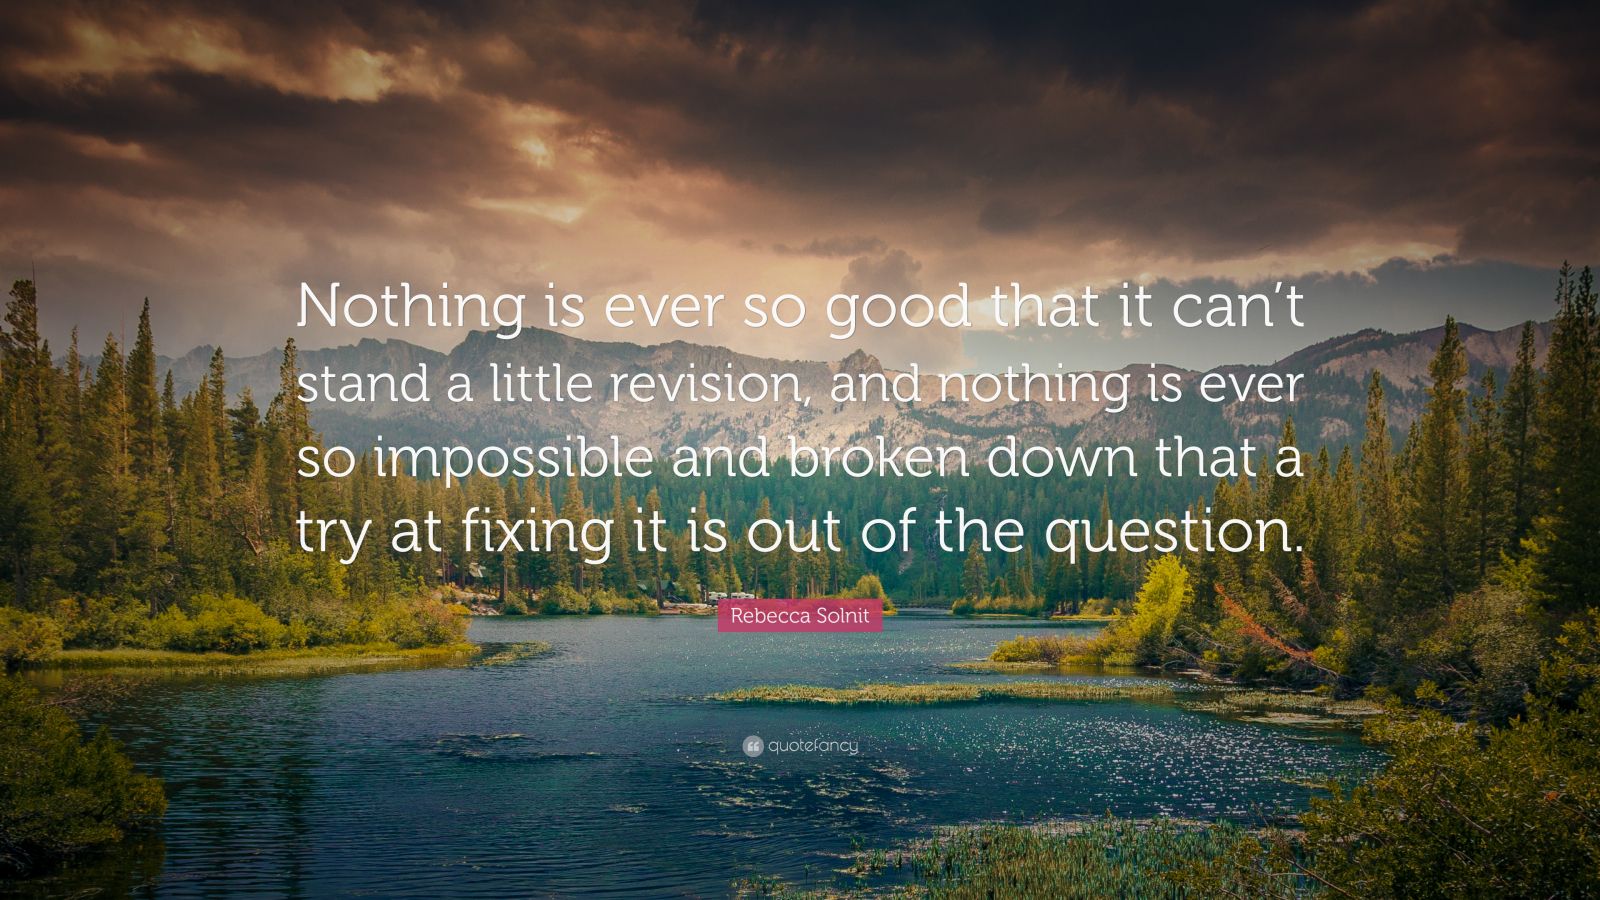 Rebecca Solnit Quote: “Nothing is ever so good that it can’t stand a ...